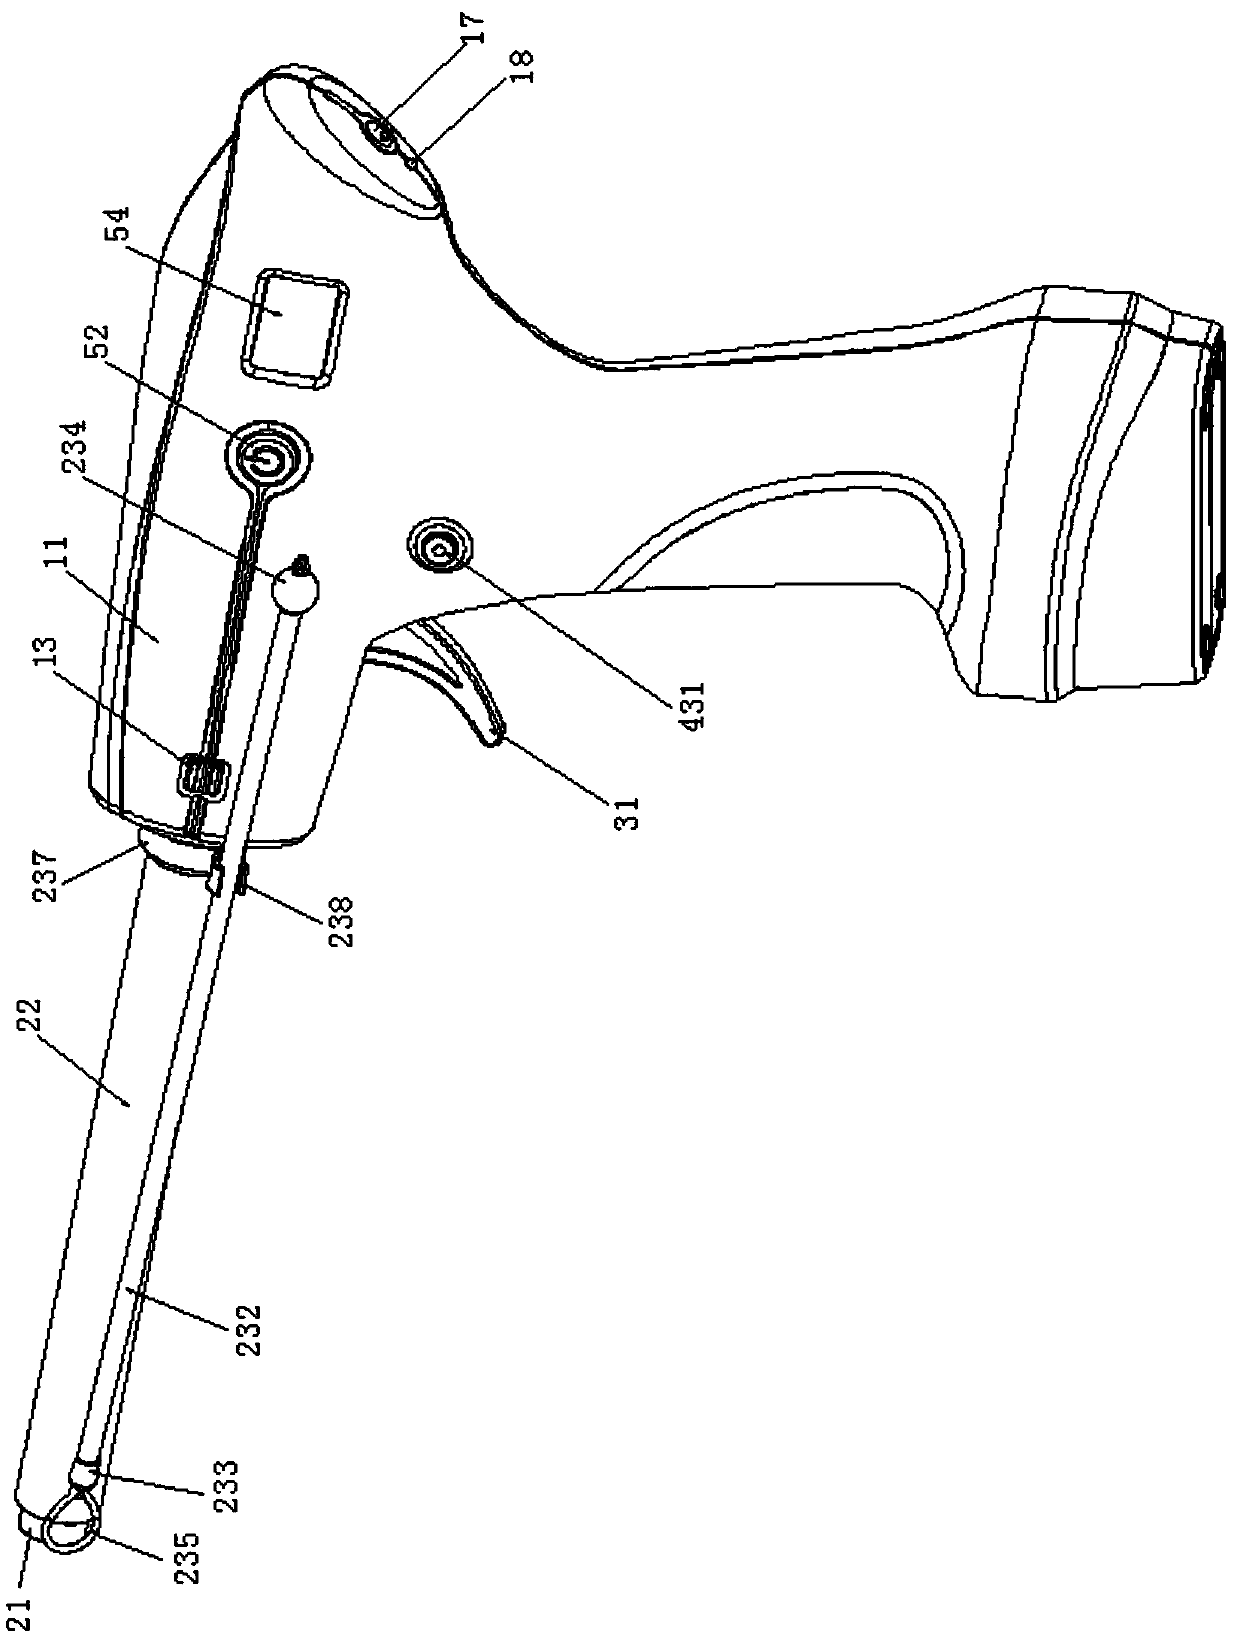 Electric anorectal loop ligature capable of reducing cross infection